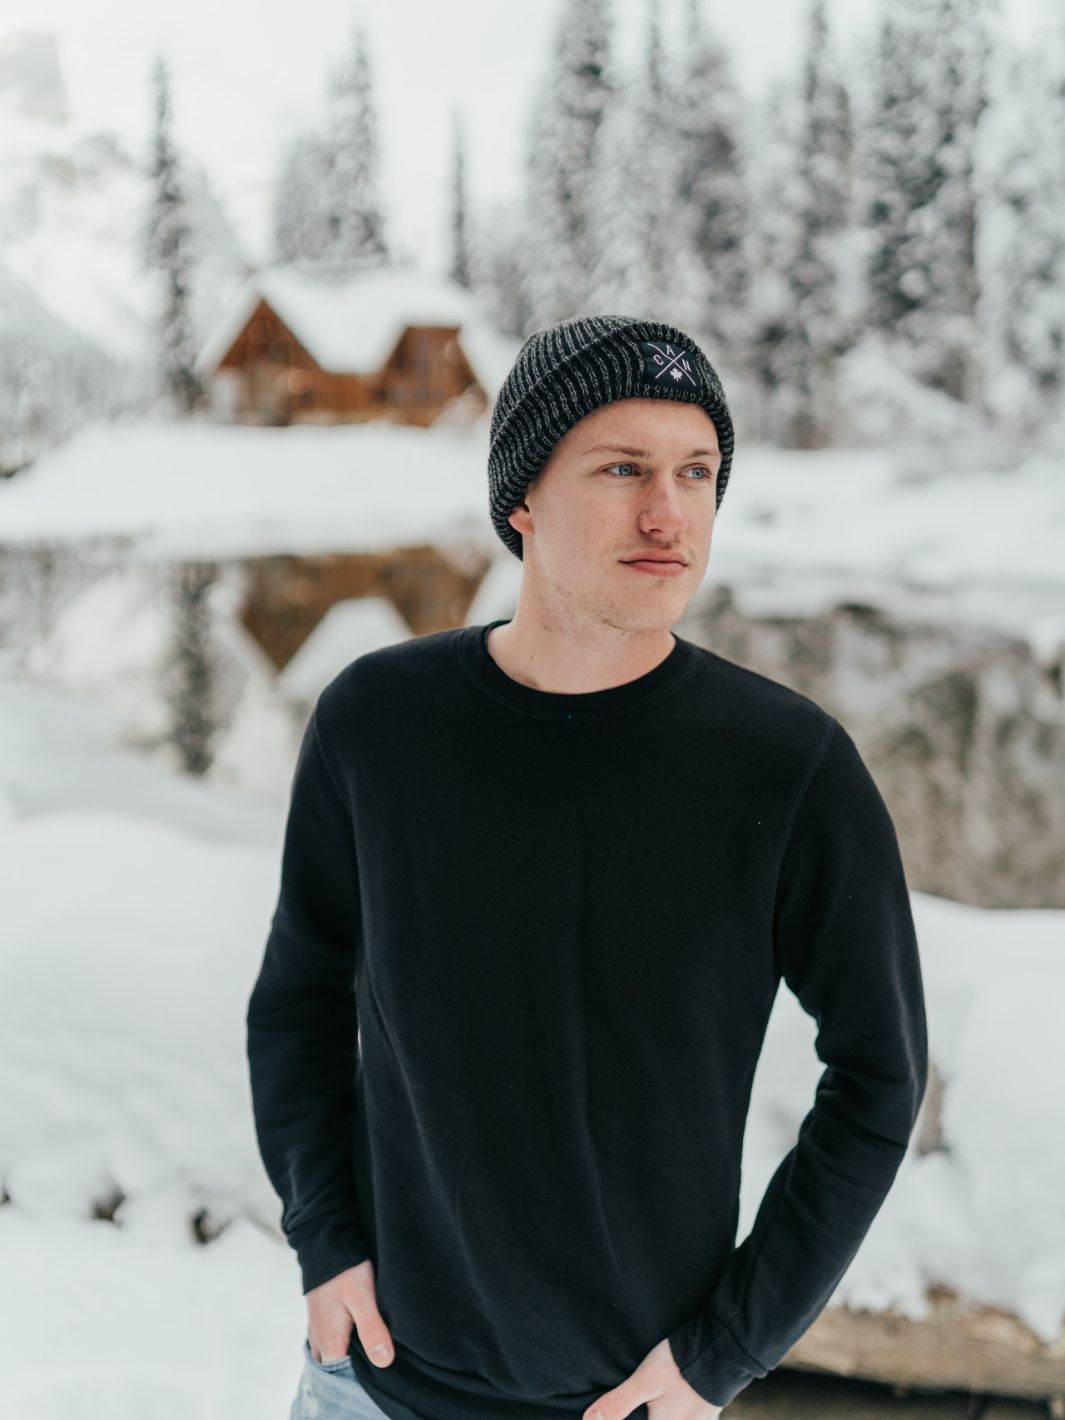 Individual wearing a blank black unisex Canadian made sweater at Emerald Lake. The sweater represents sustainable fashion, comfort, and local manufacturing.